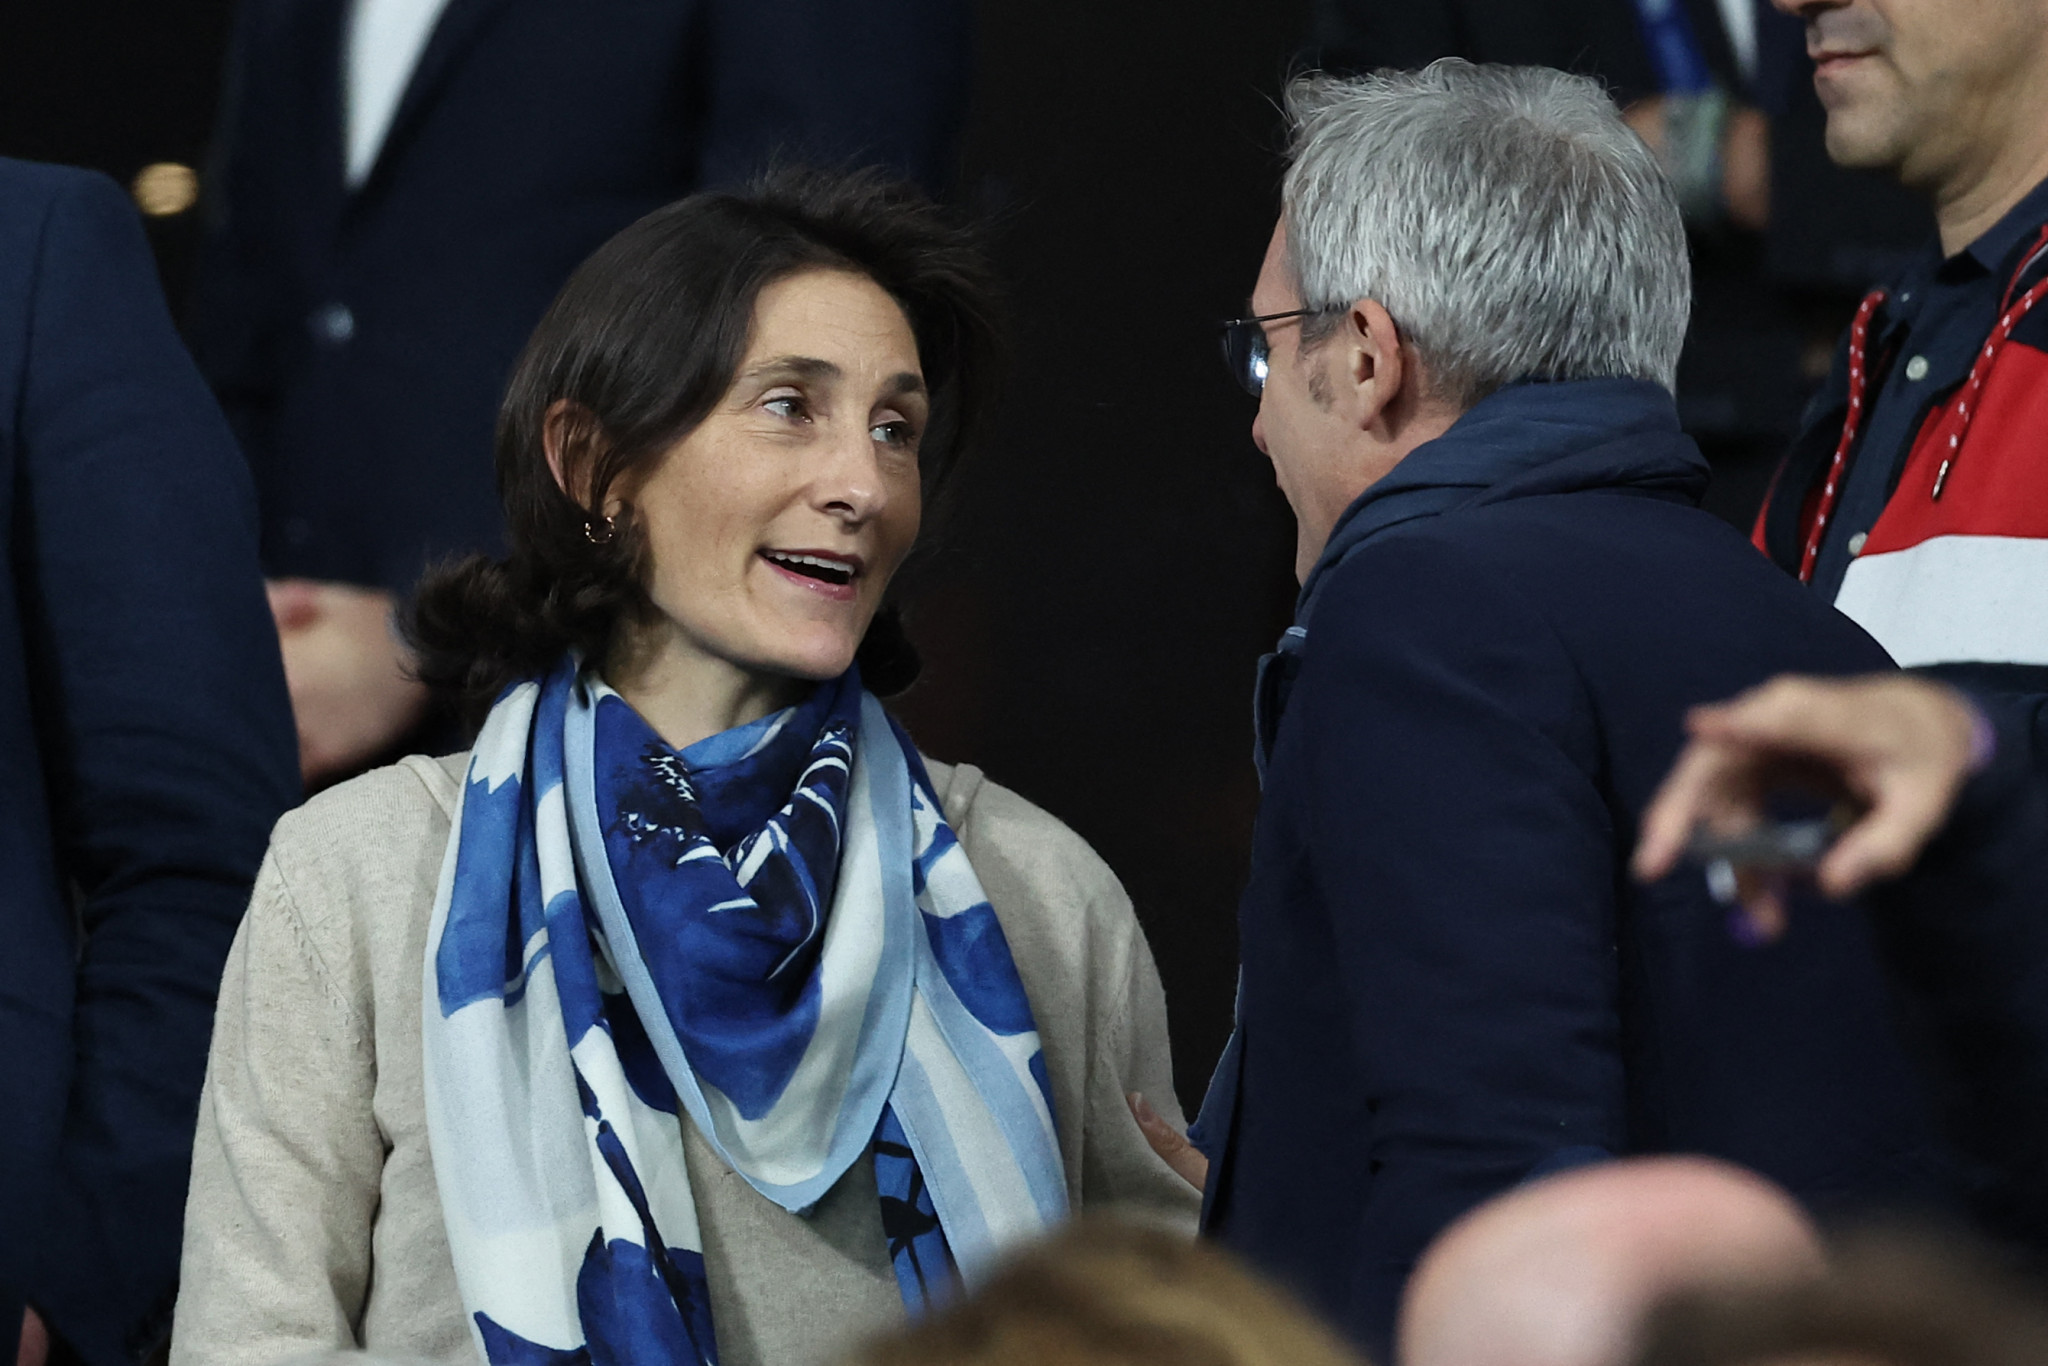 French Sports Minister Amélie Oudéa-Castéra has played down fears that inflation could lead to a rise in Paris 2024 costs ©Getty Images